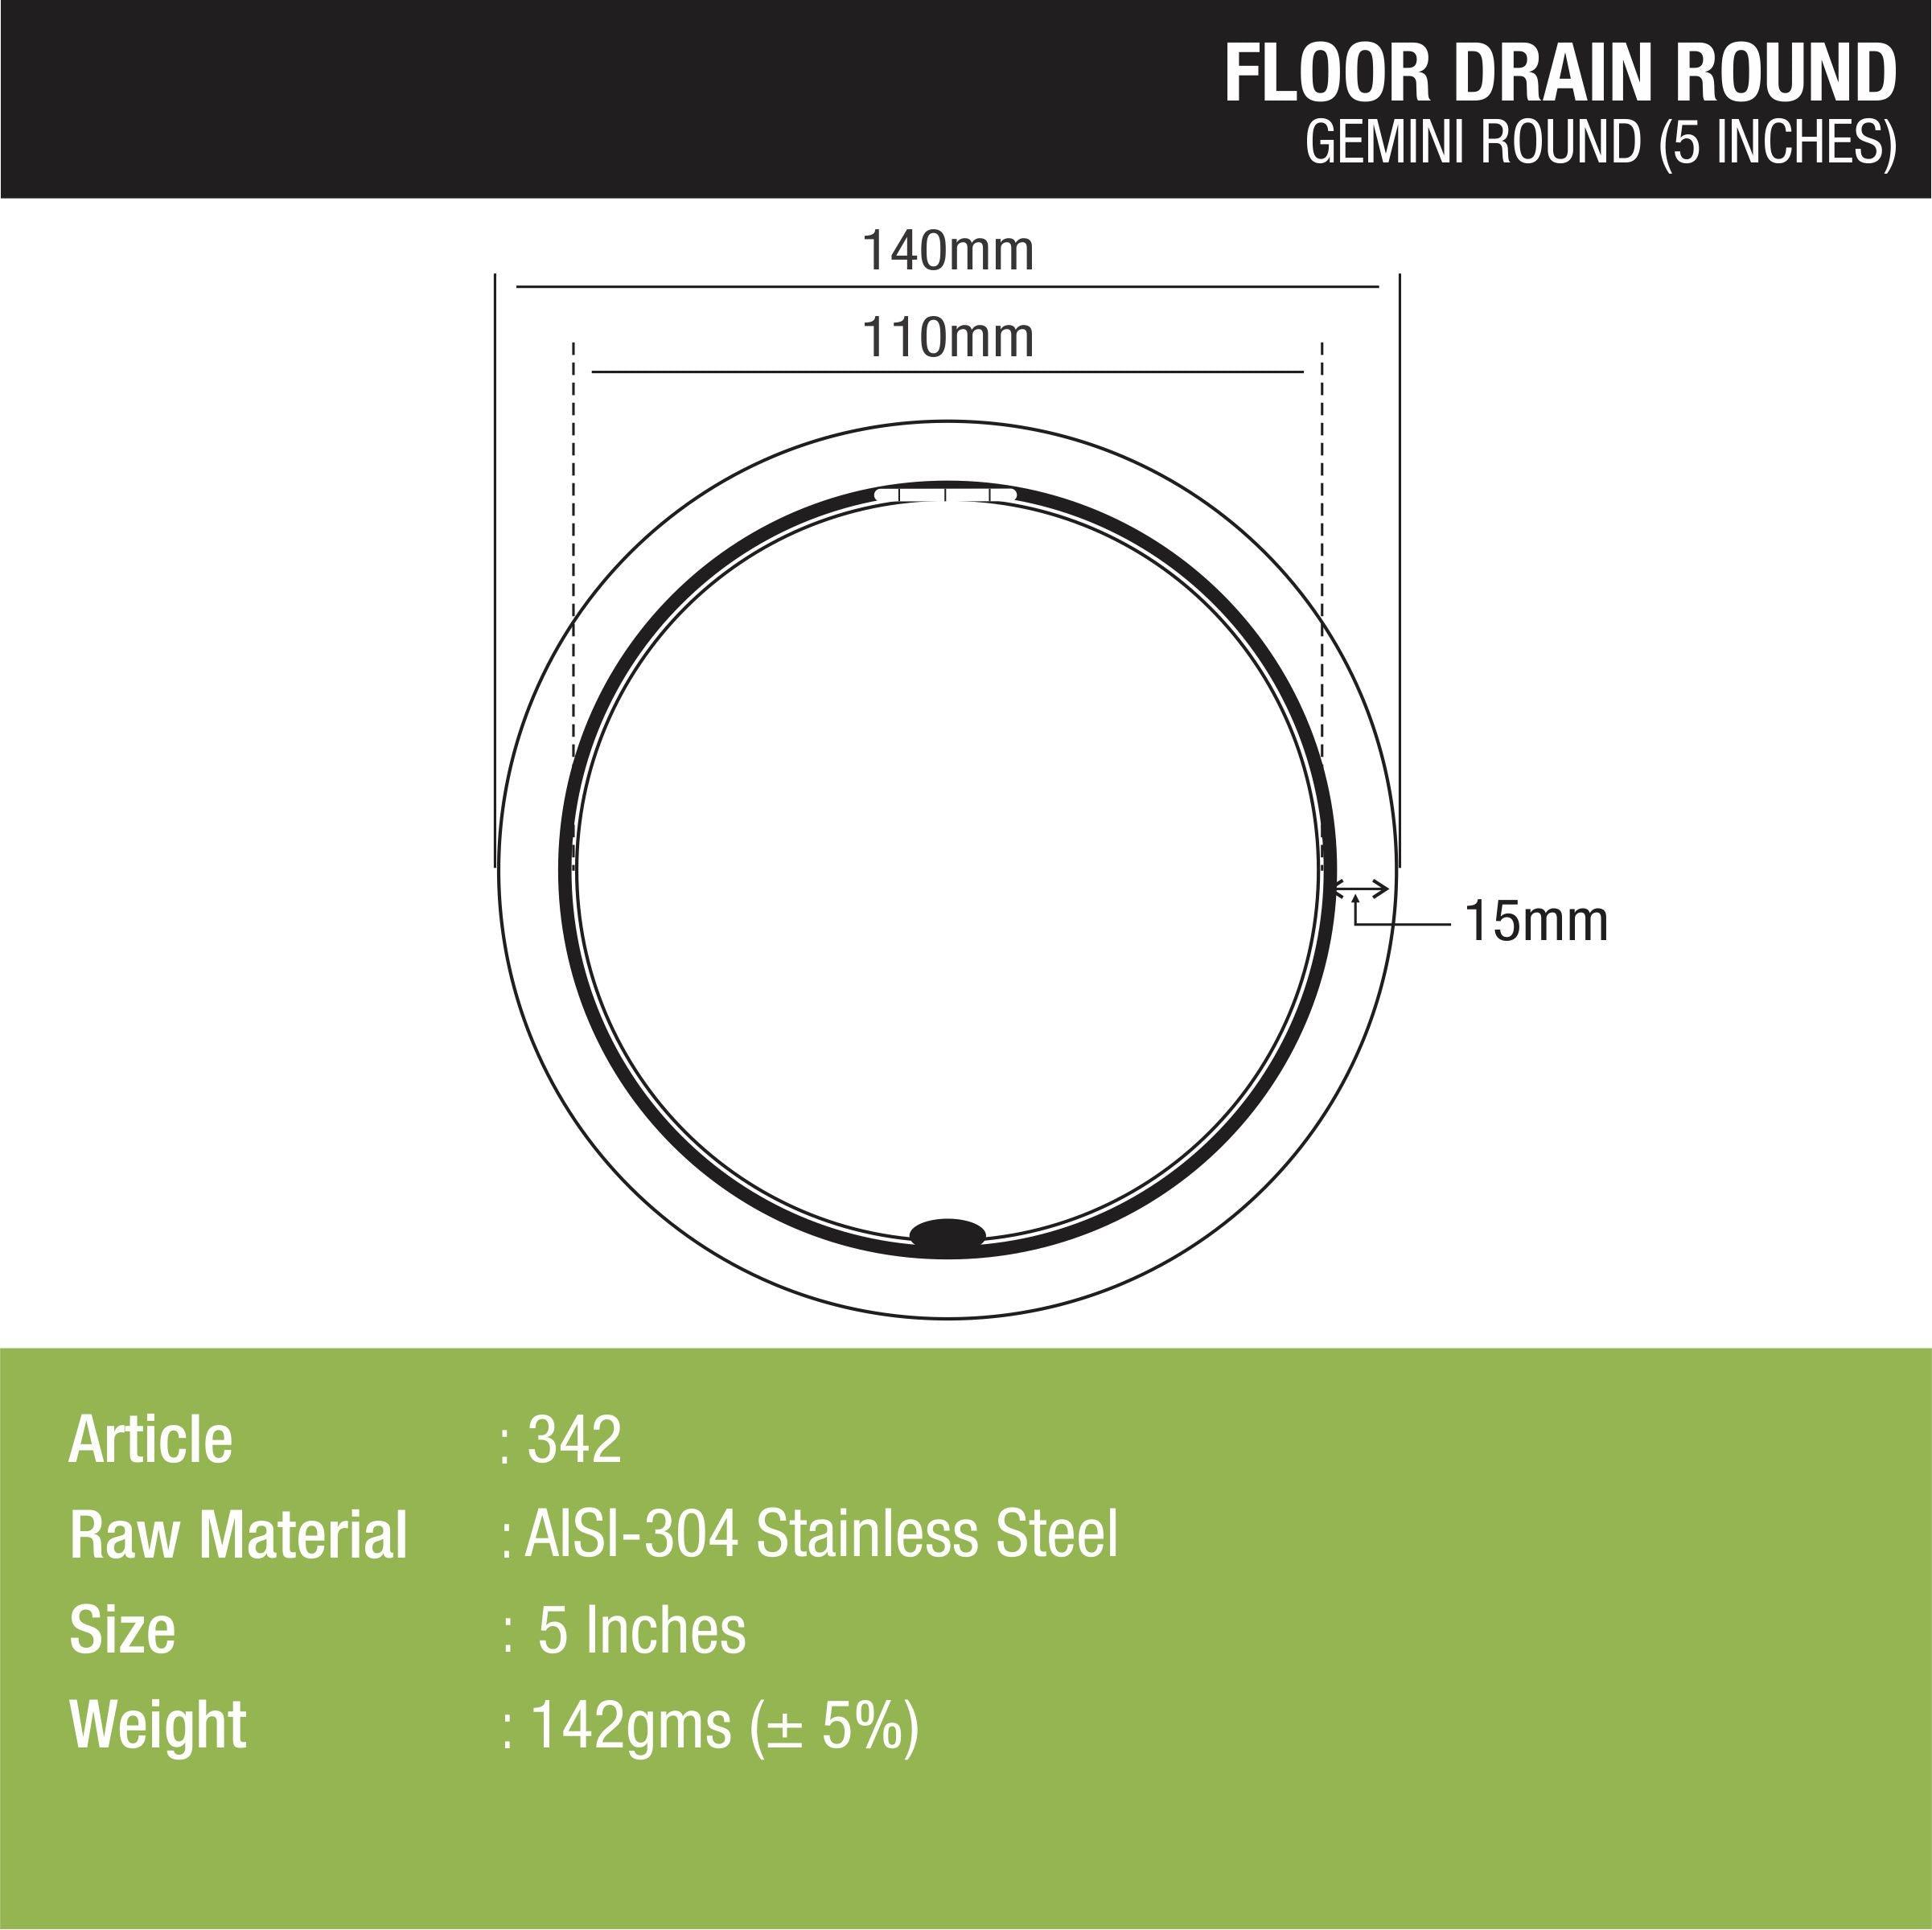 Gemini Round Floor Drain with Jali (5 inches) dimensions and sizes